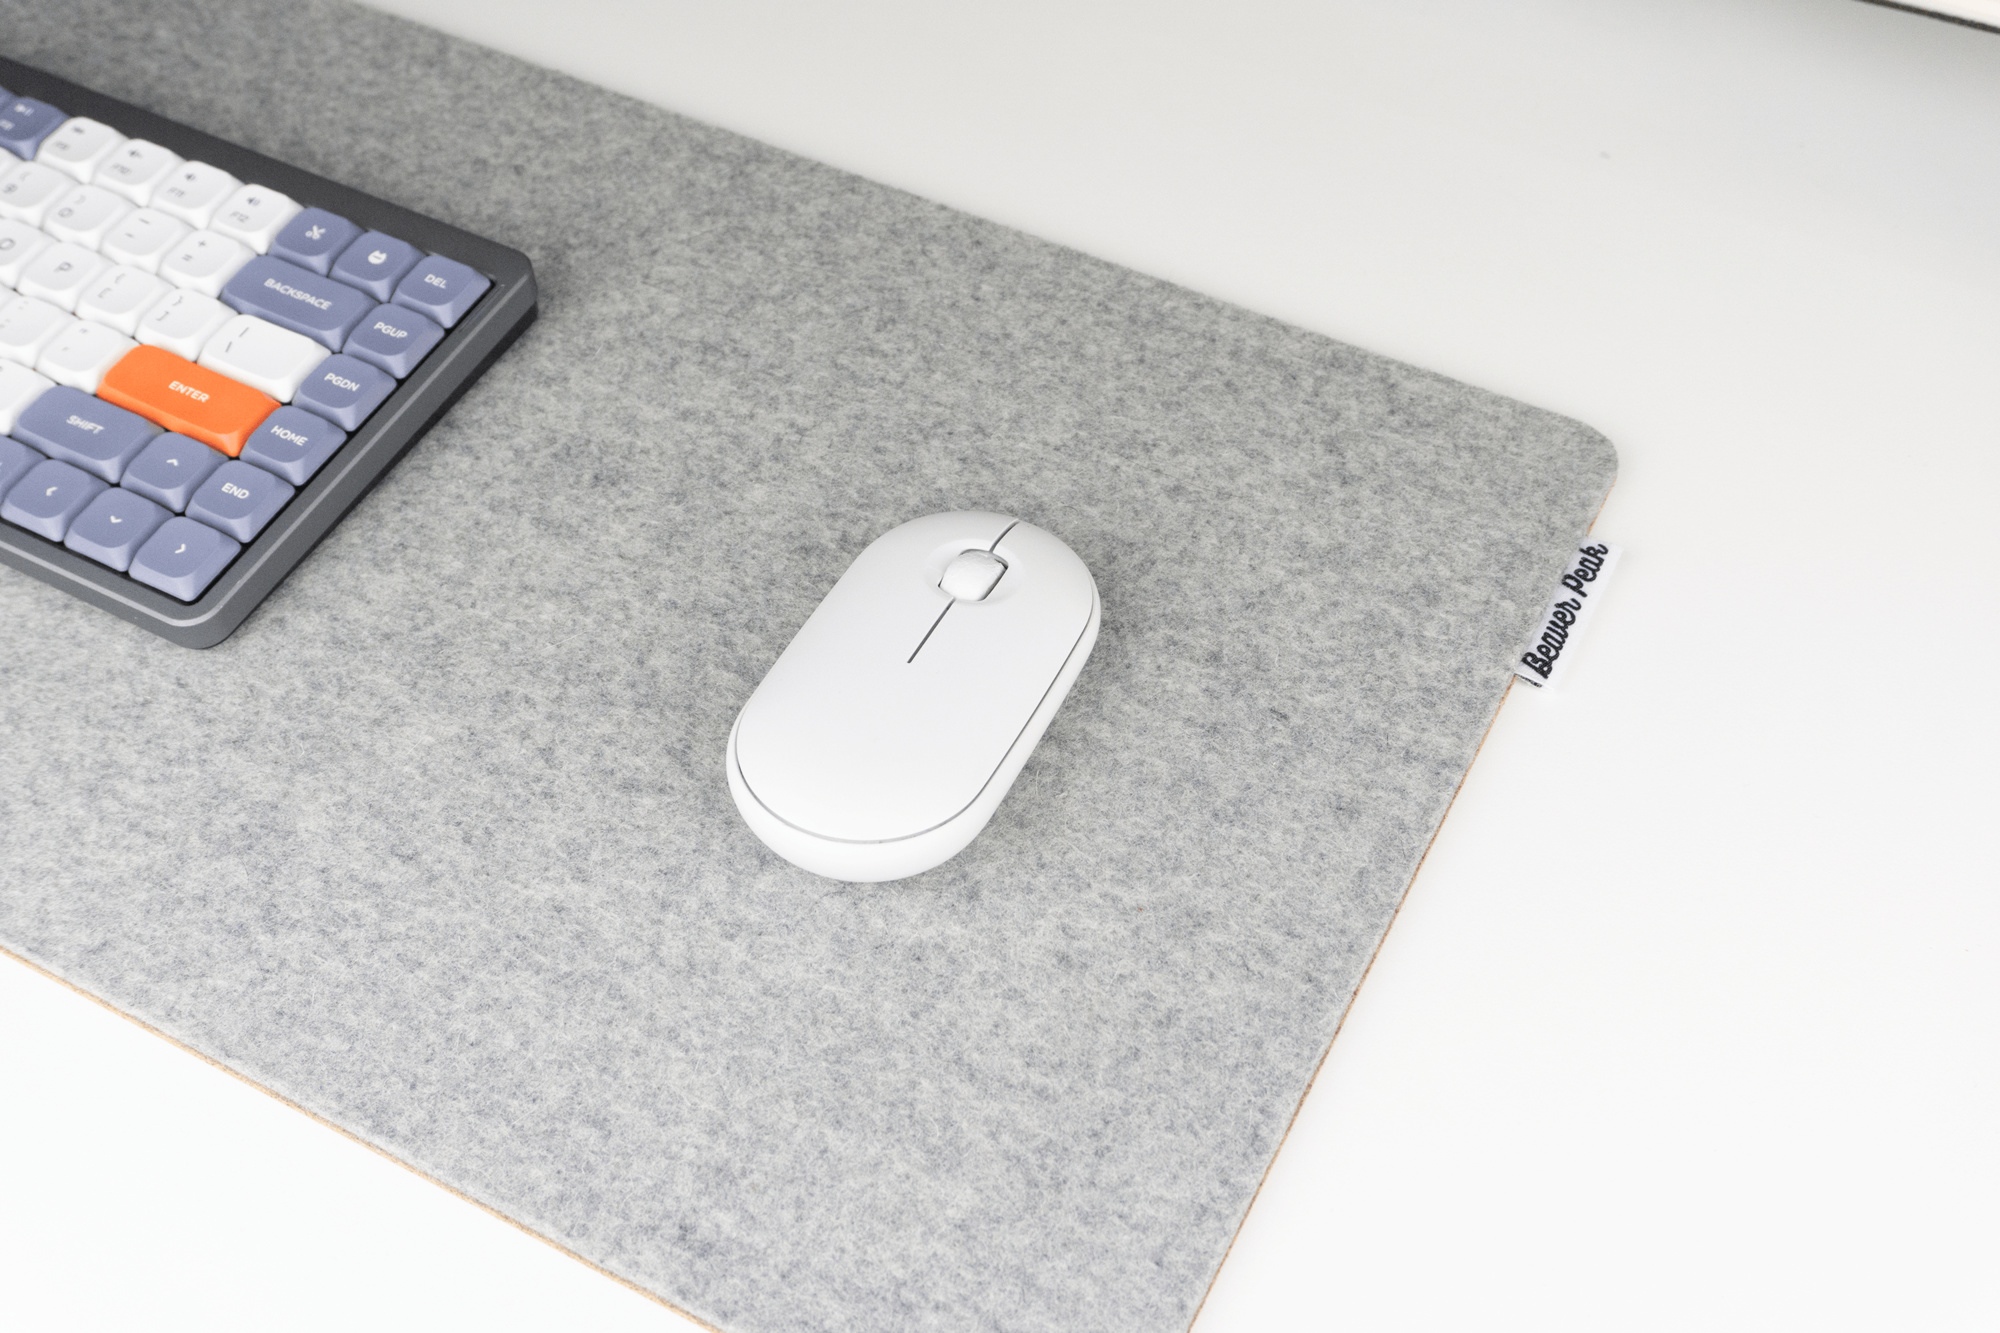 Closeup of a grey merino wool desk mat with white mouse and Nuphy air keyboard on top. The wool desk mat is on an office desk and has a BeaverPeak logo tag protruding from the right side of the mat.